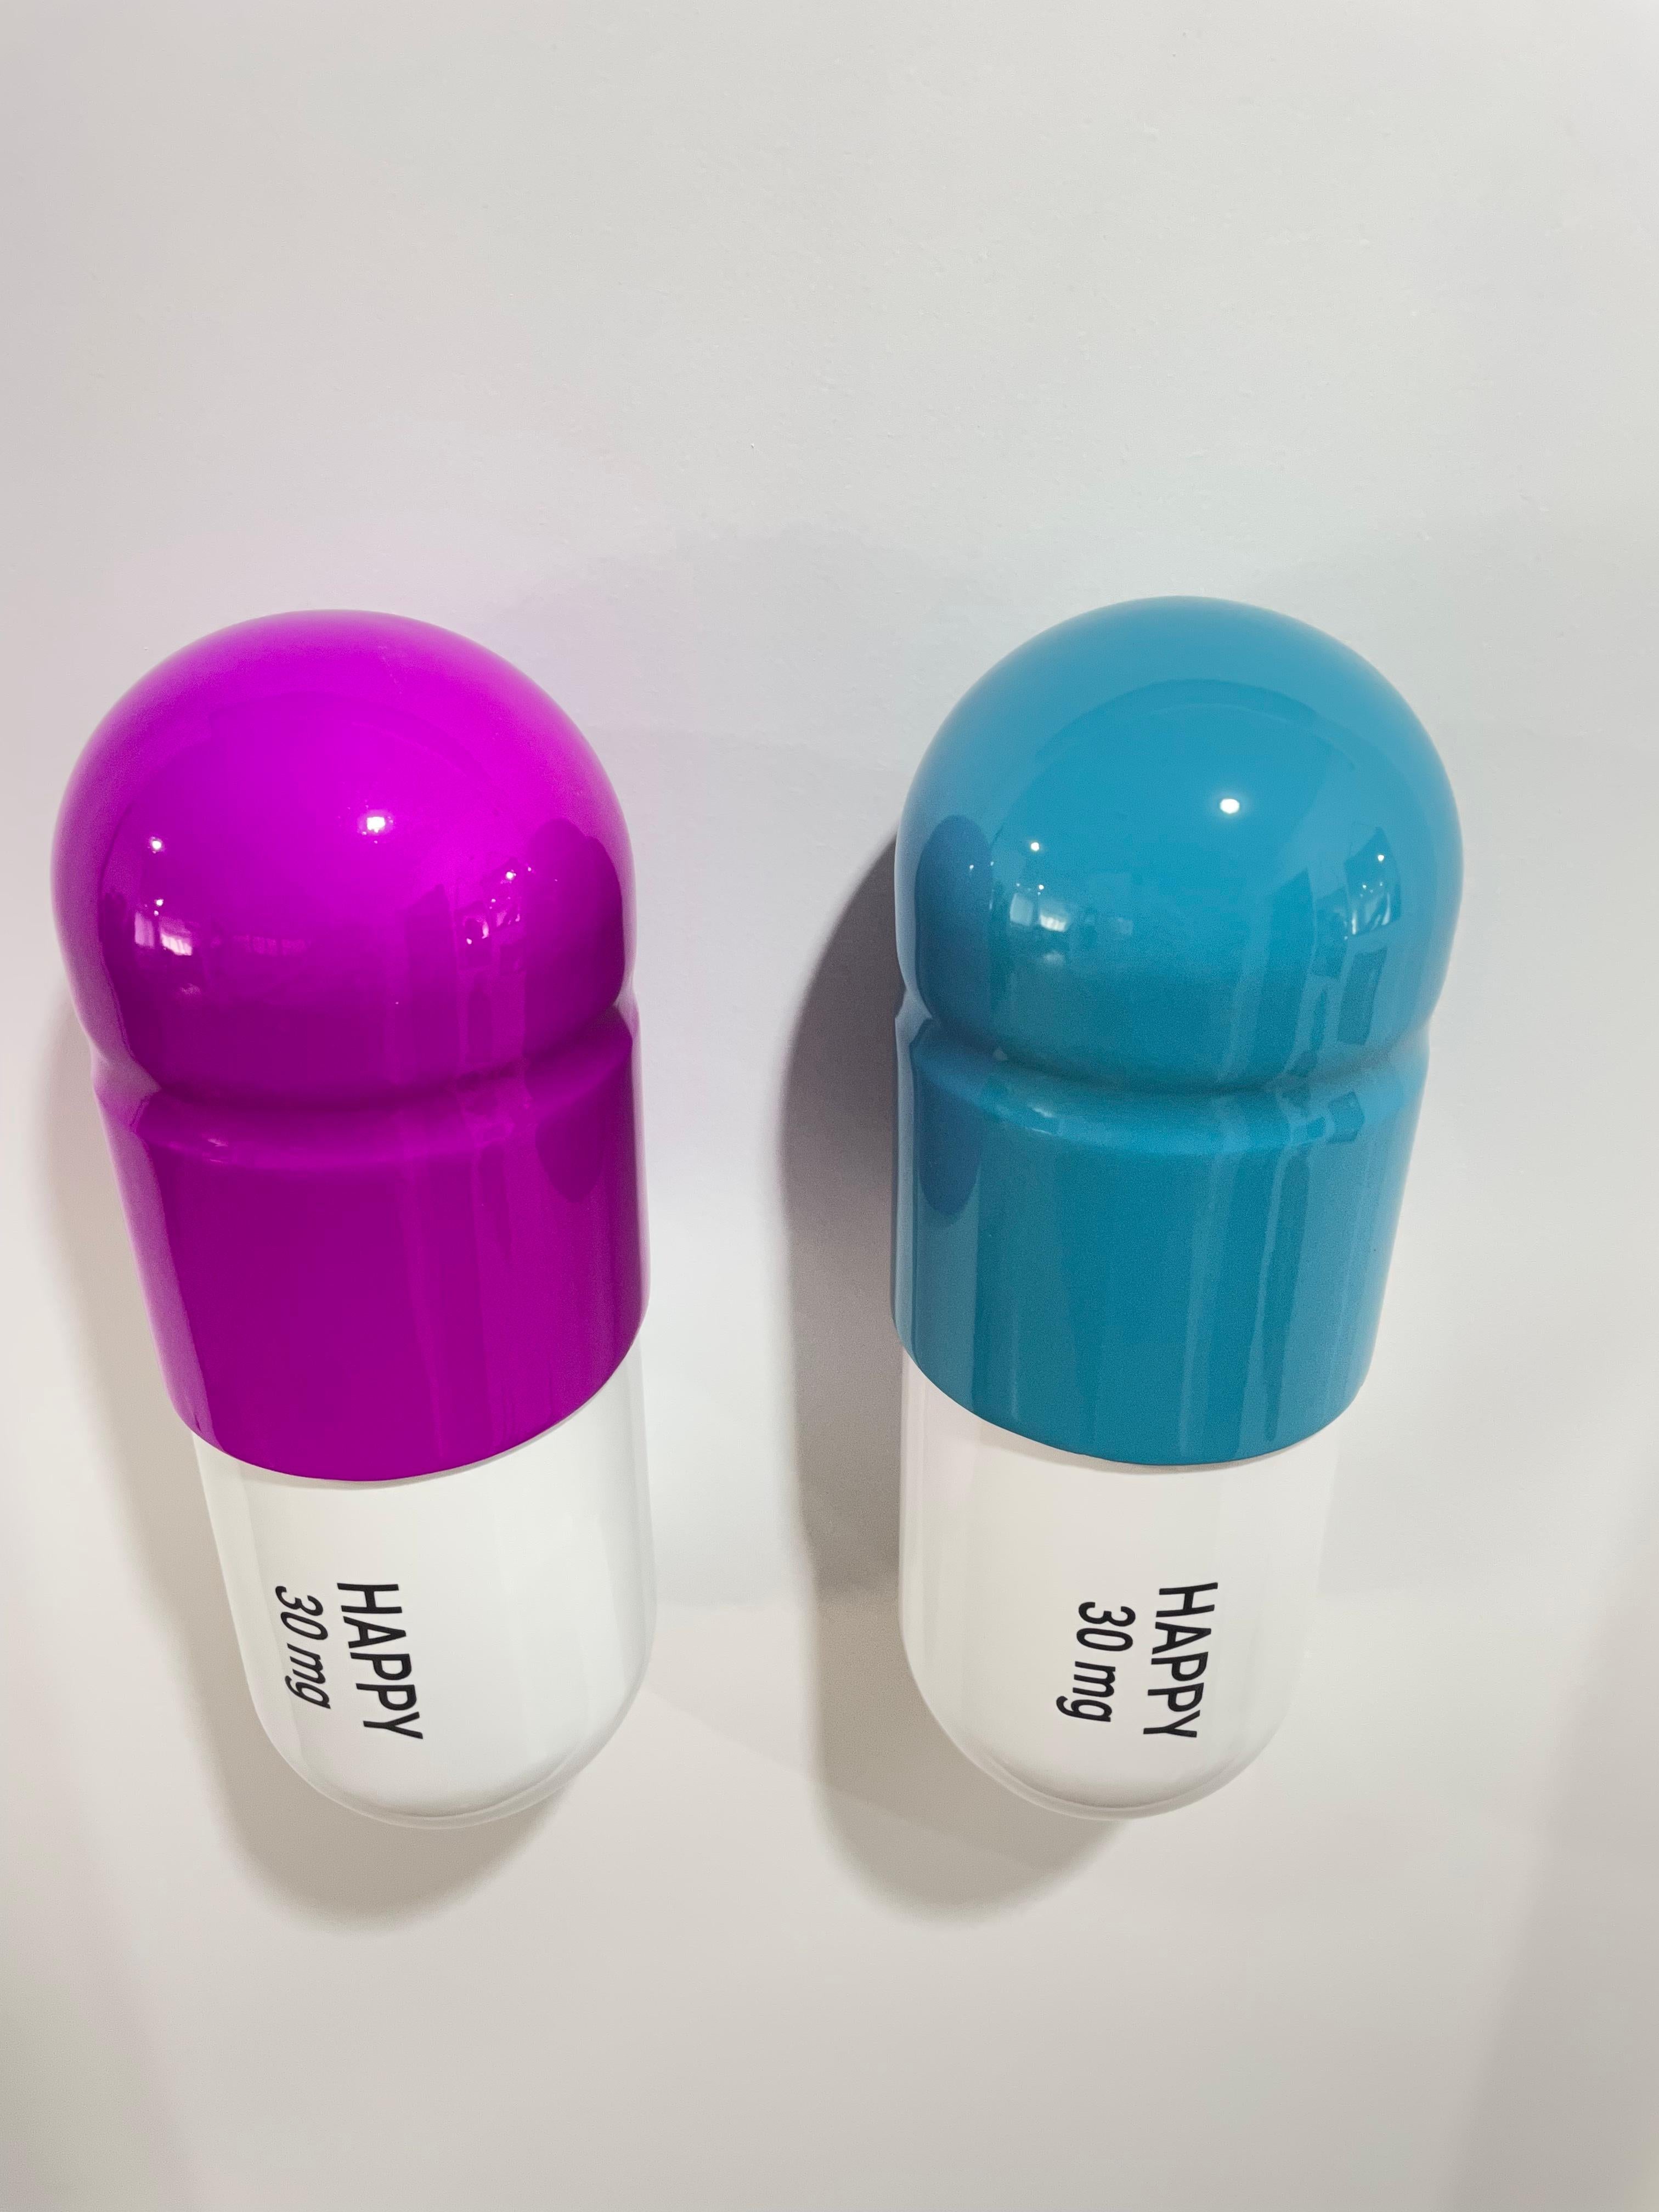 30 ML Happy pill Combo (purple, turquoise, white) - figurative sculpture - Pop Art Sculpture by Tal Nehoray